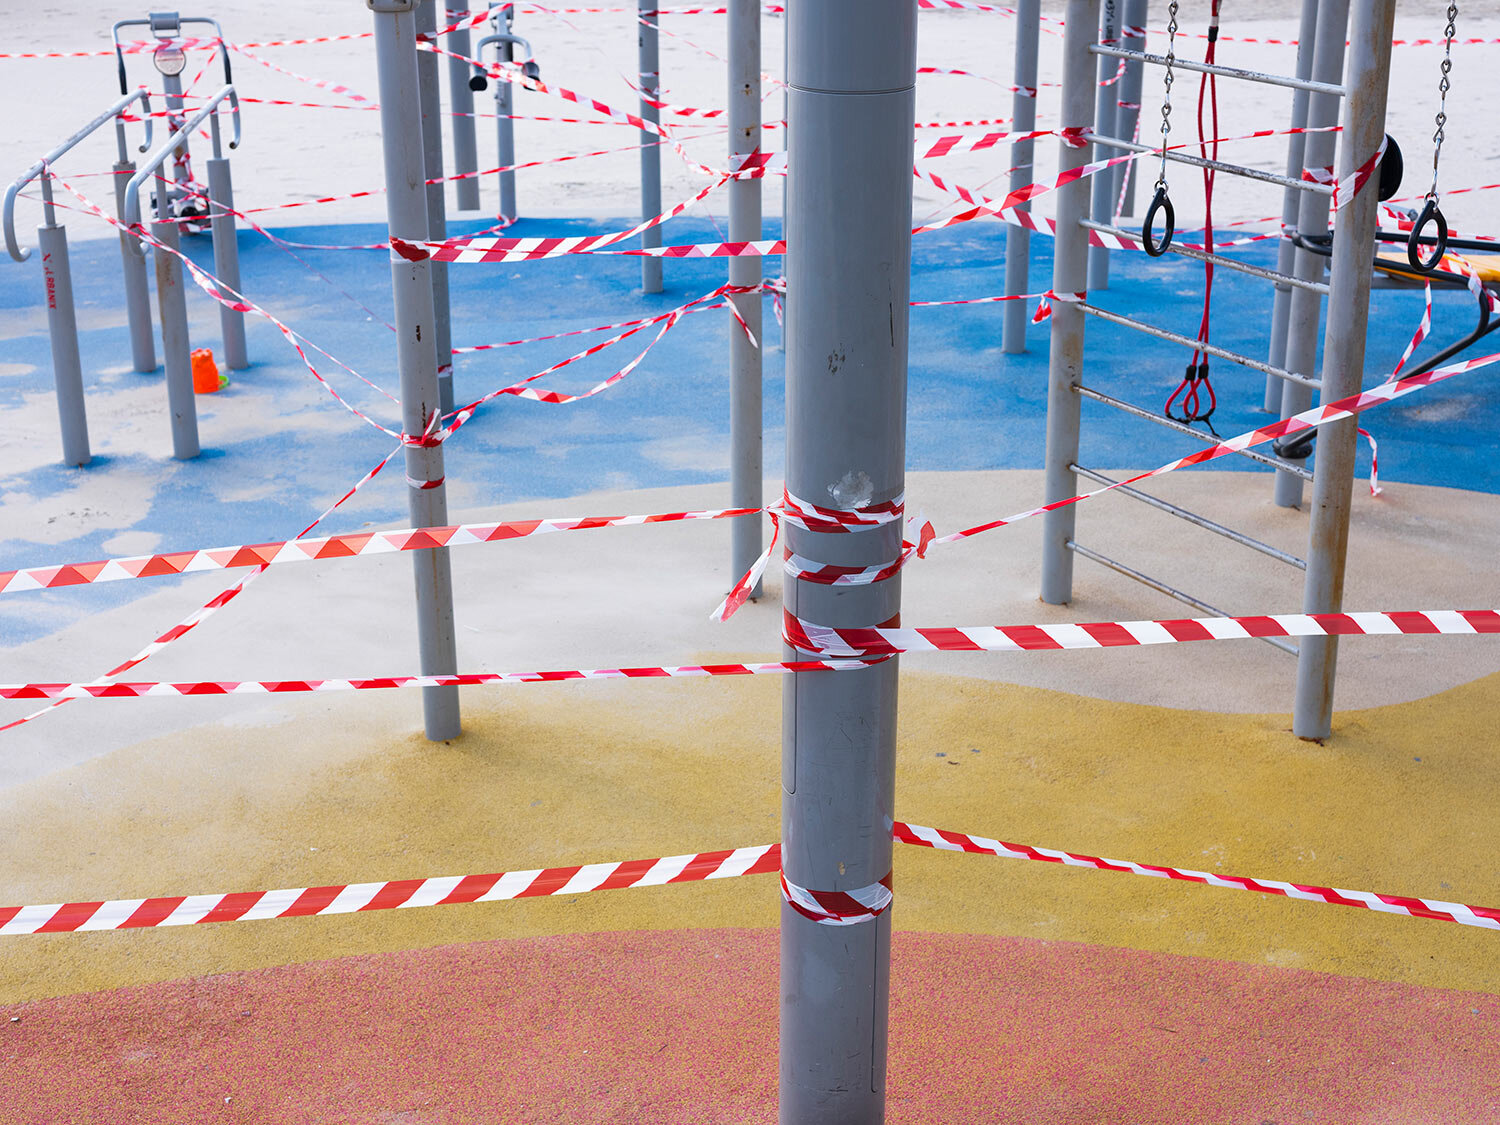  This Thursday, March 19, 2020 photo shows a free gym at Tel Aviv's beachfront wrapped in tape to prevent public access.  (AP Photo/Oded Balilty) 